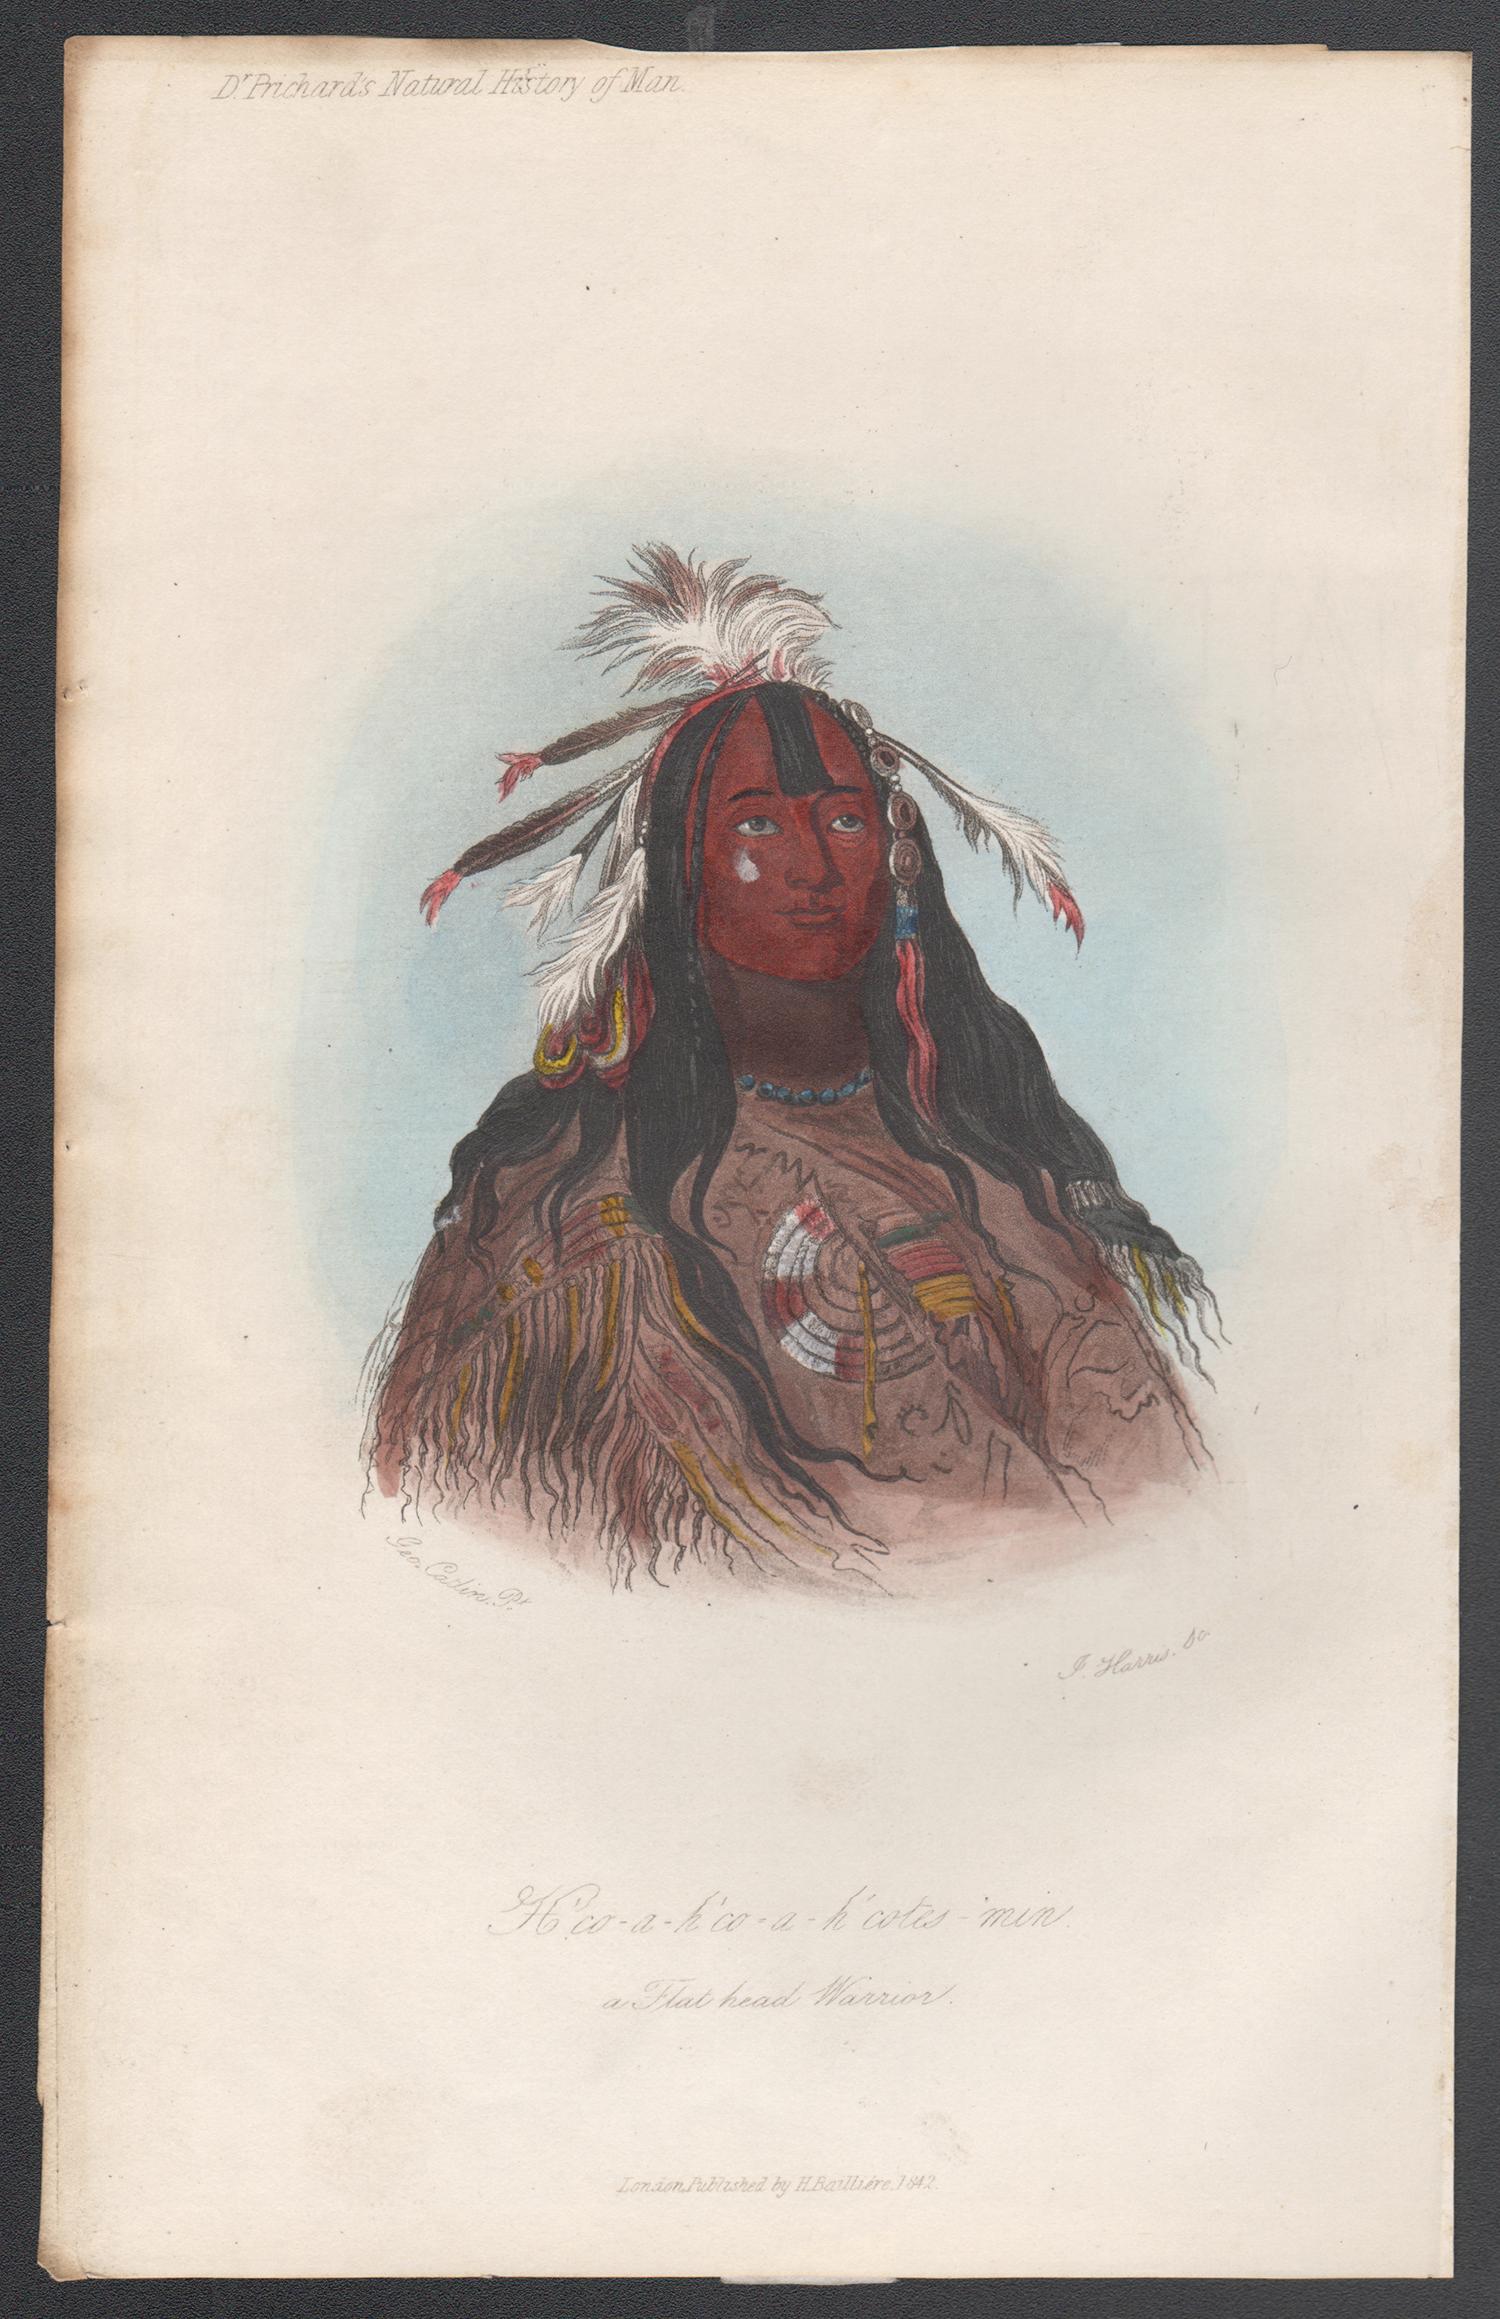 H'co-a-h'co-a-cotes-min - A Flat Head Warrior Native American portrait engraving - Print by George Catlin